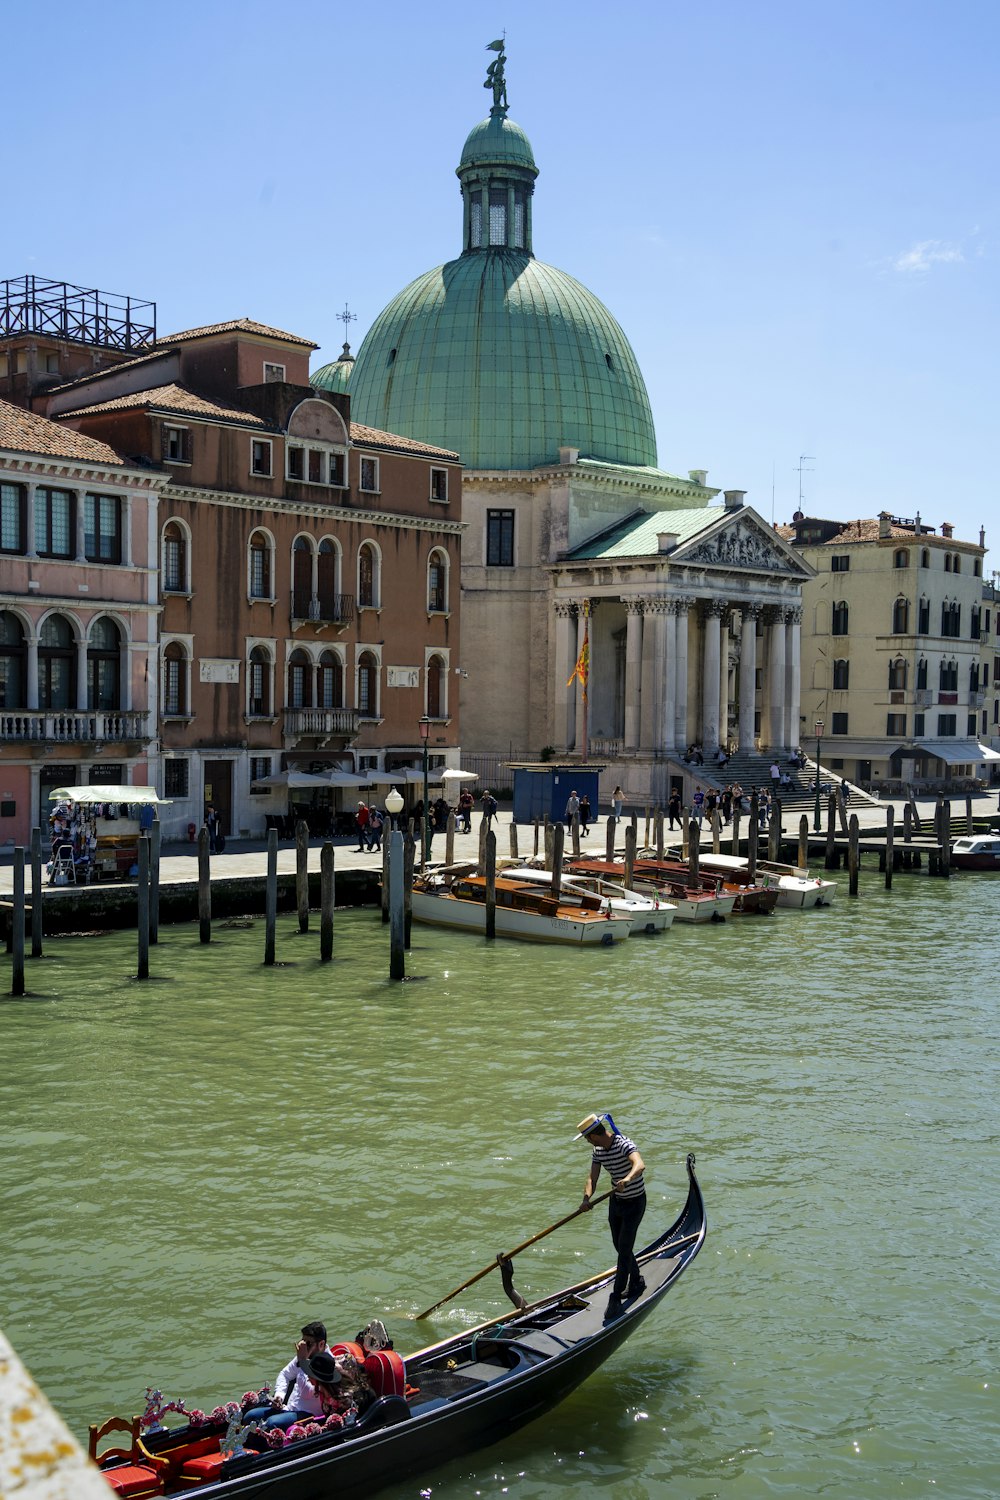 a gondola in front of a building on the water